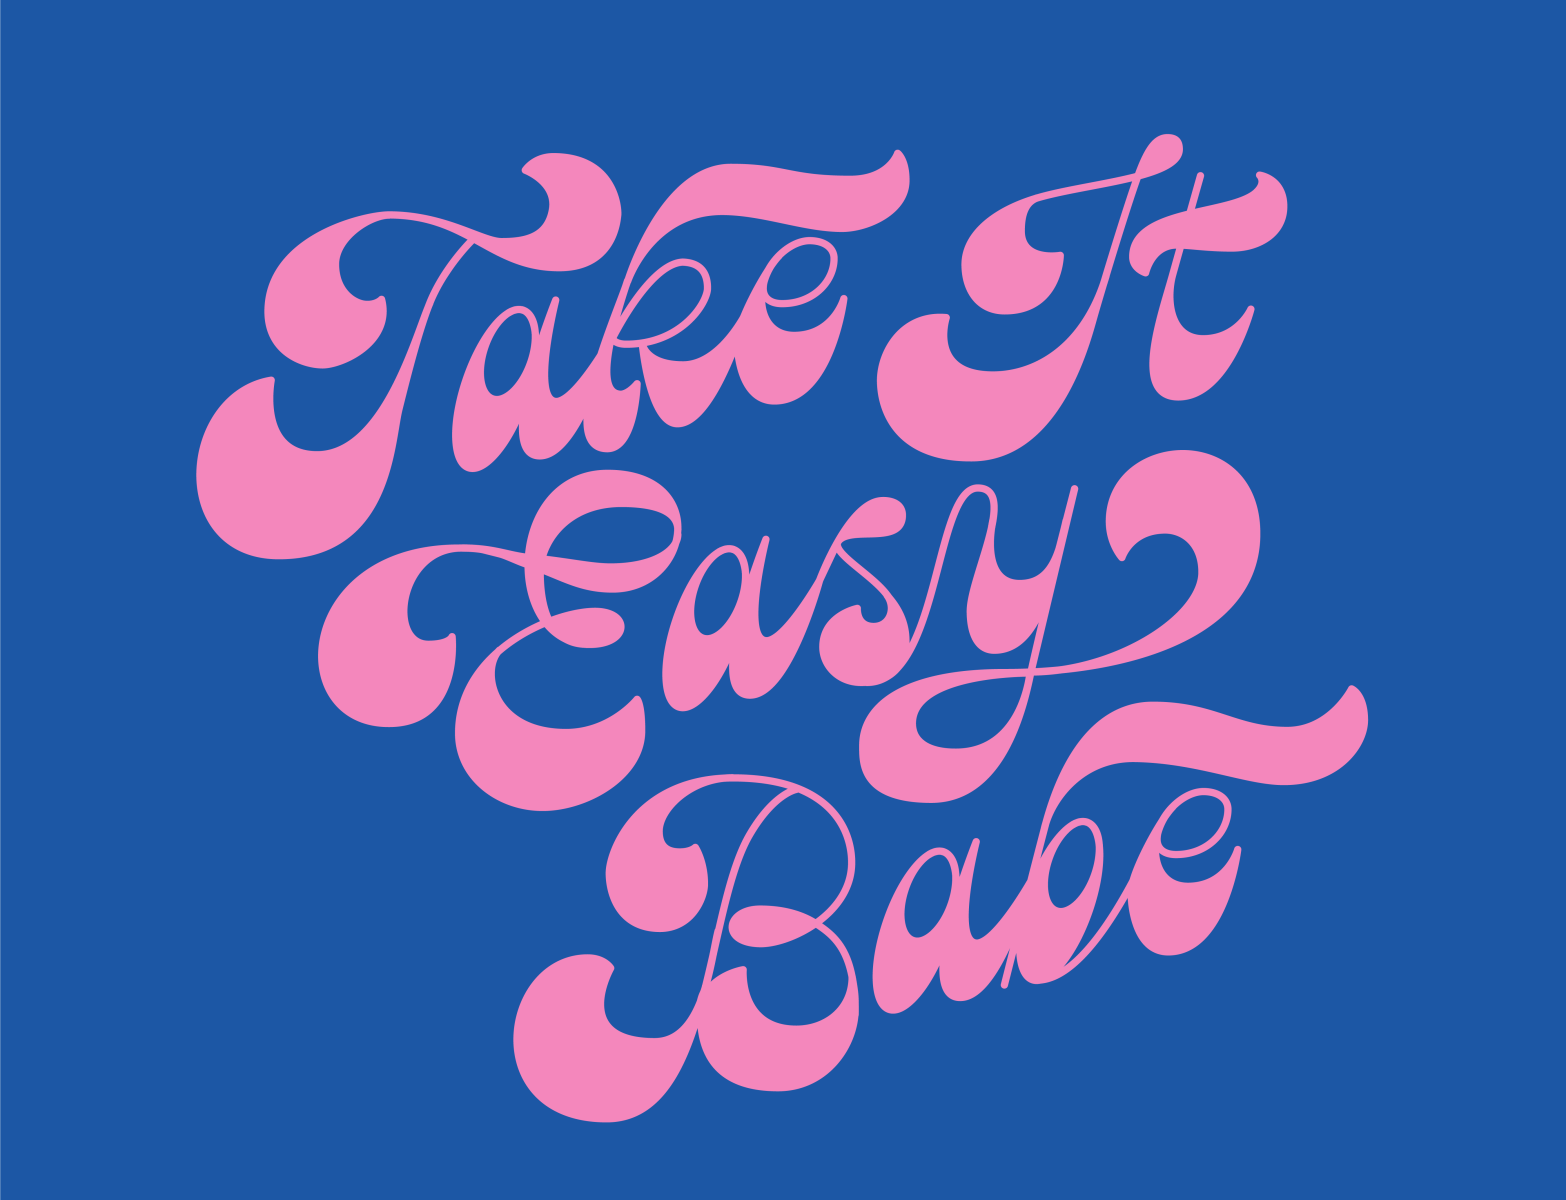 Take It Easy Babe by Jessica Molina on Dribbble